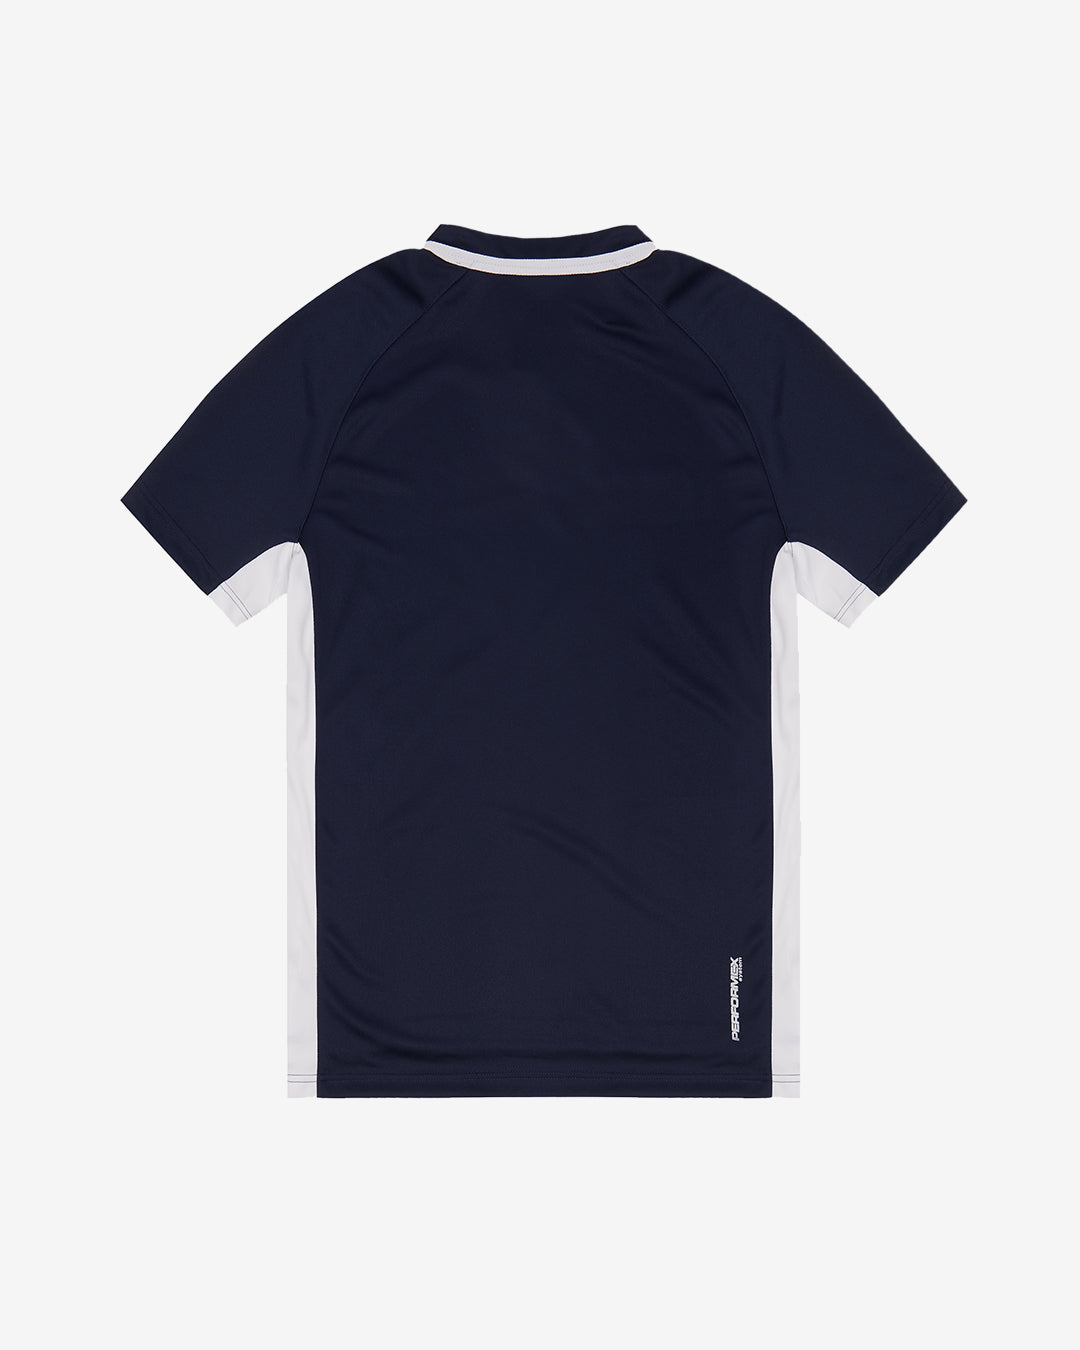 EP:0109 - Rugby Training Jersey - Navy